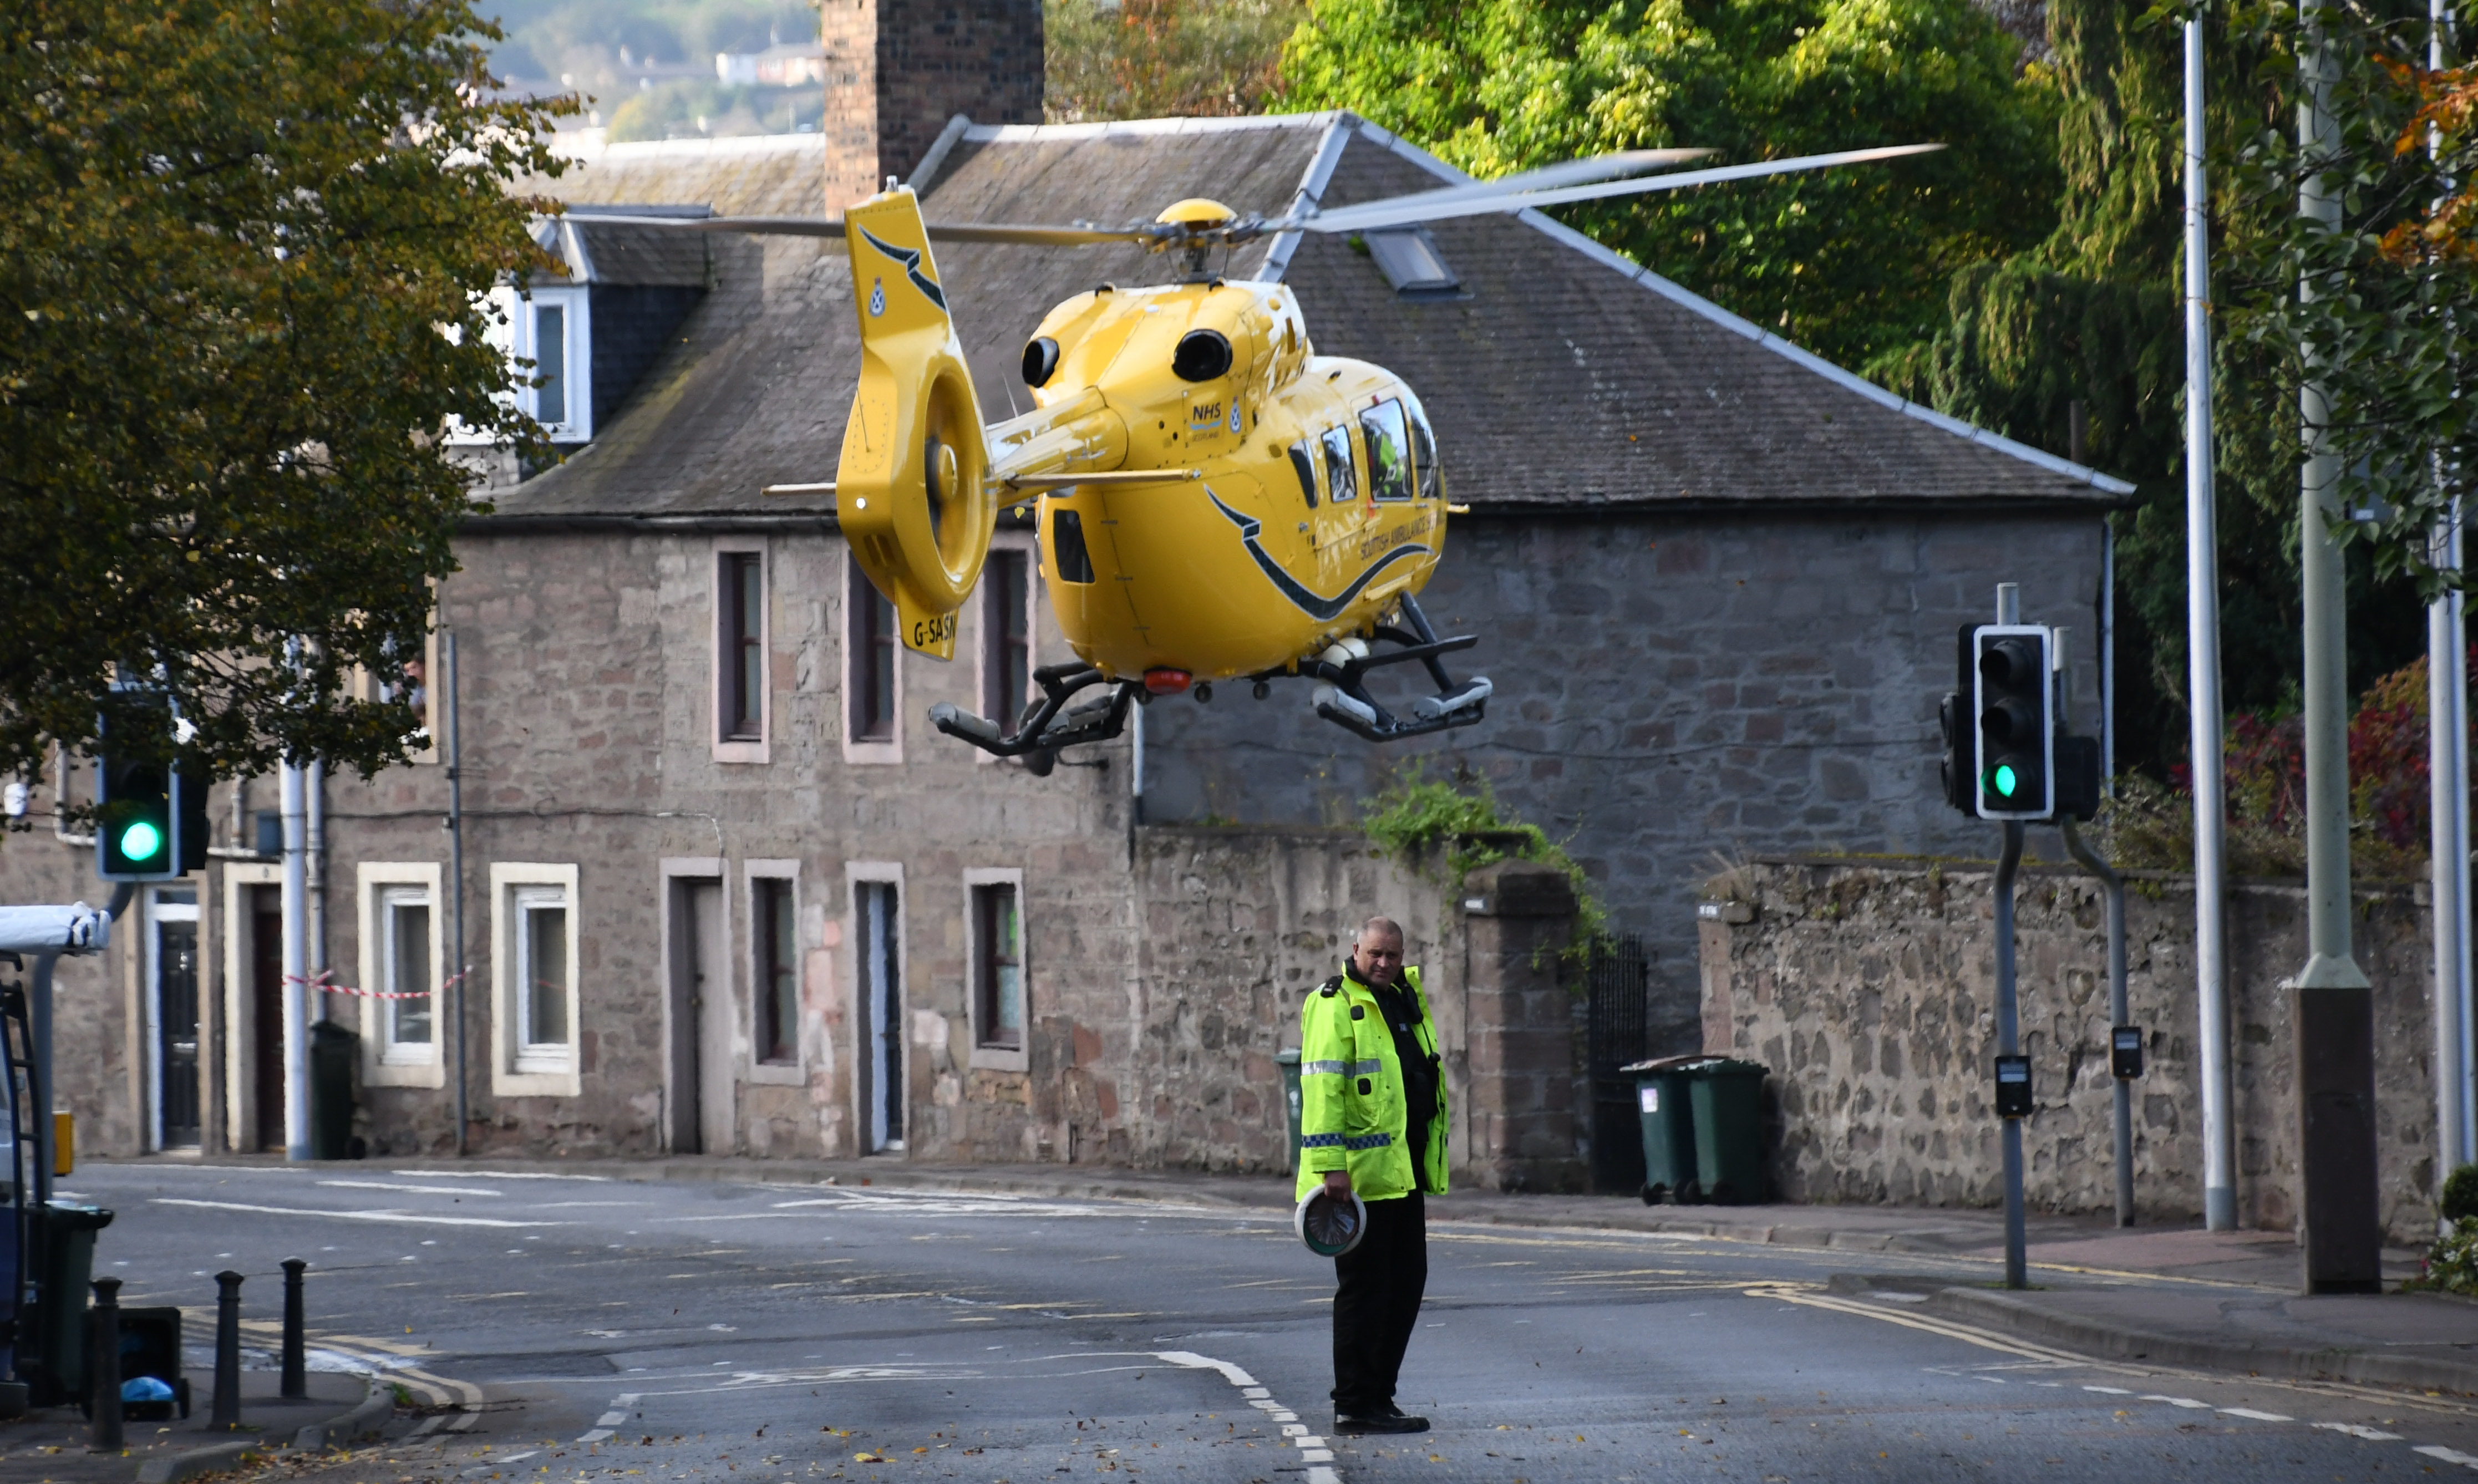 The air ambulance taking off from the scene in Perth